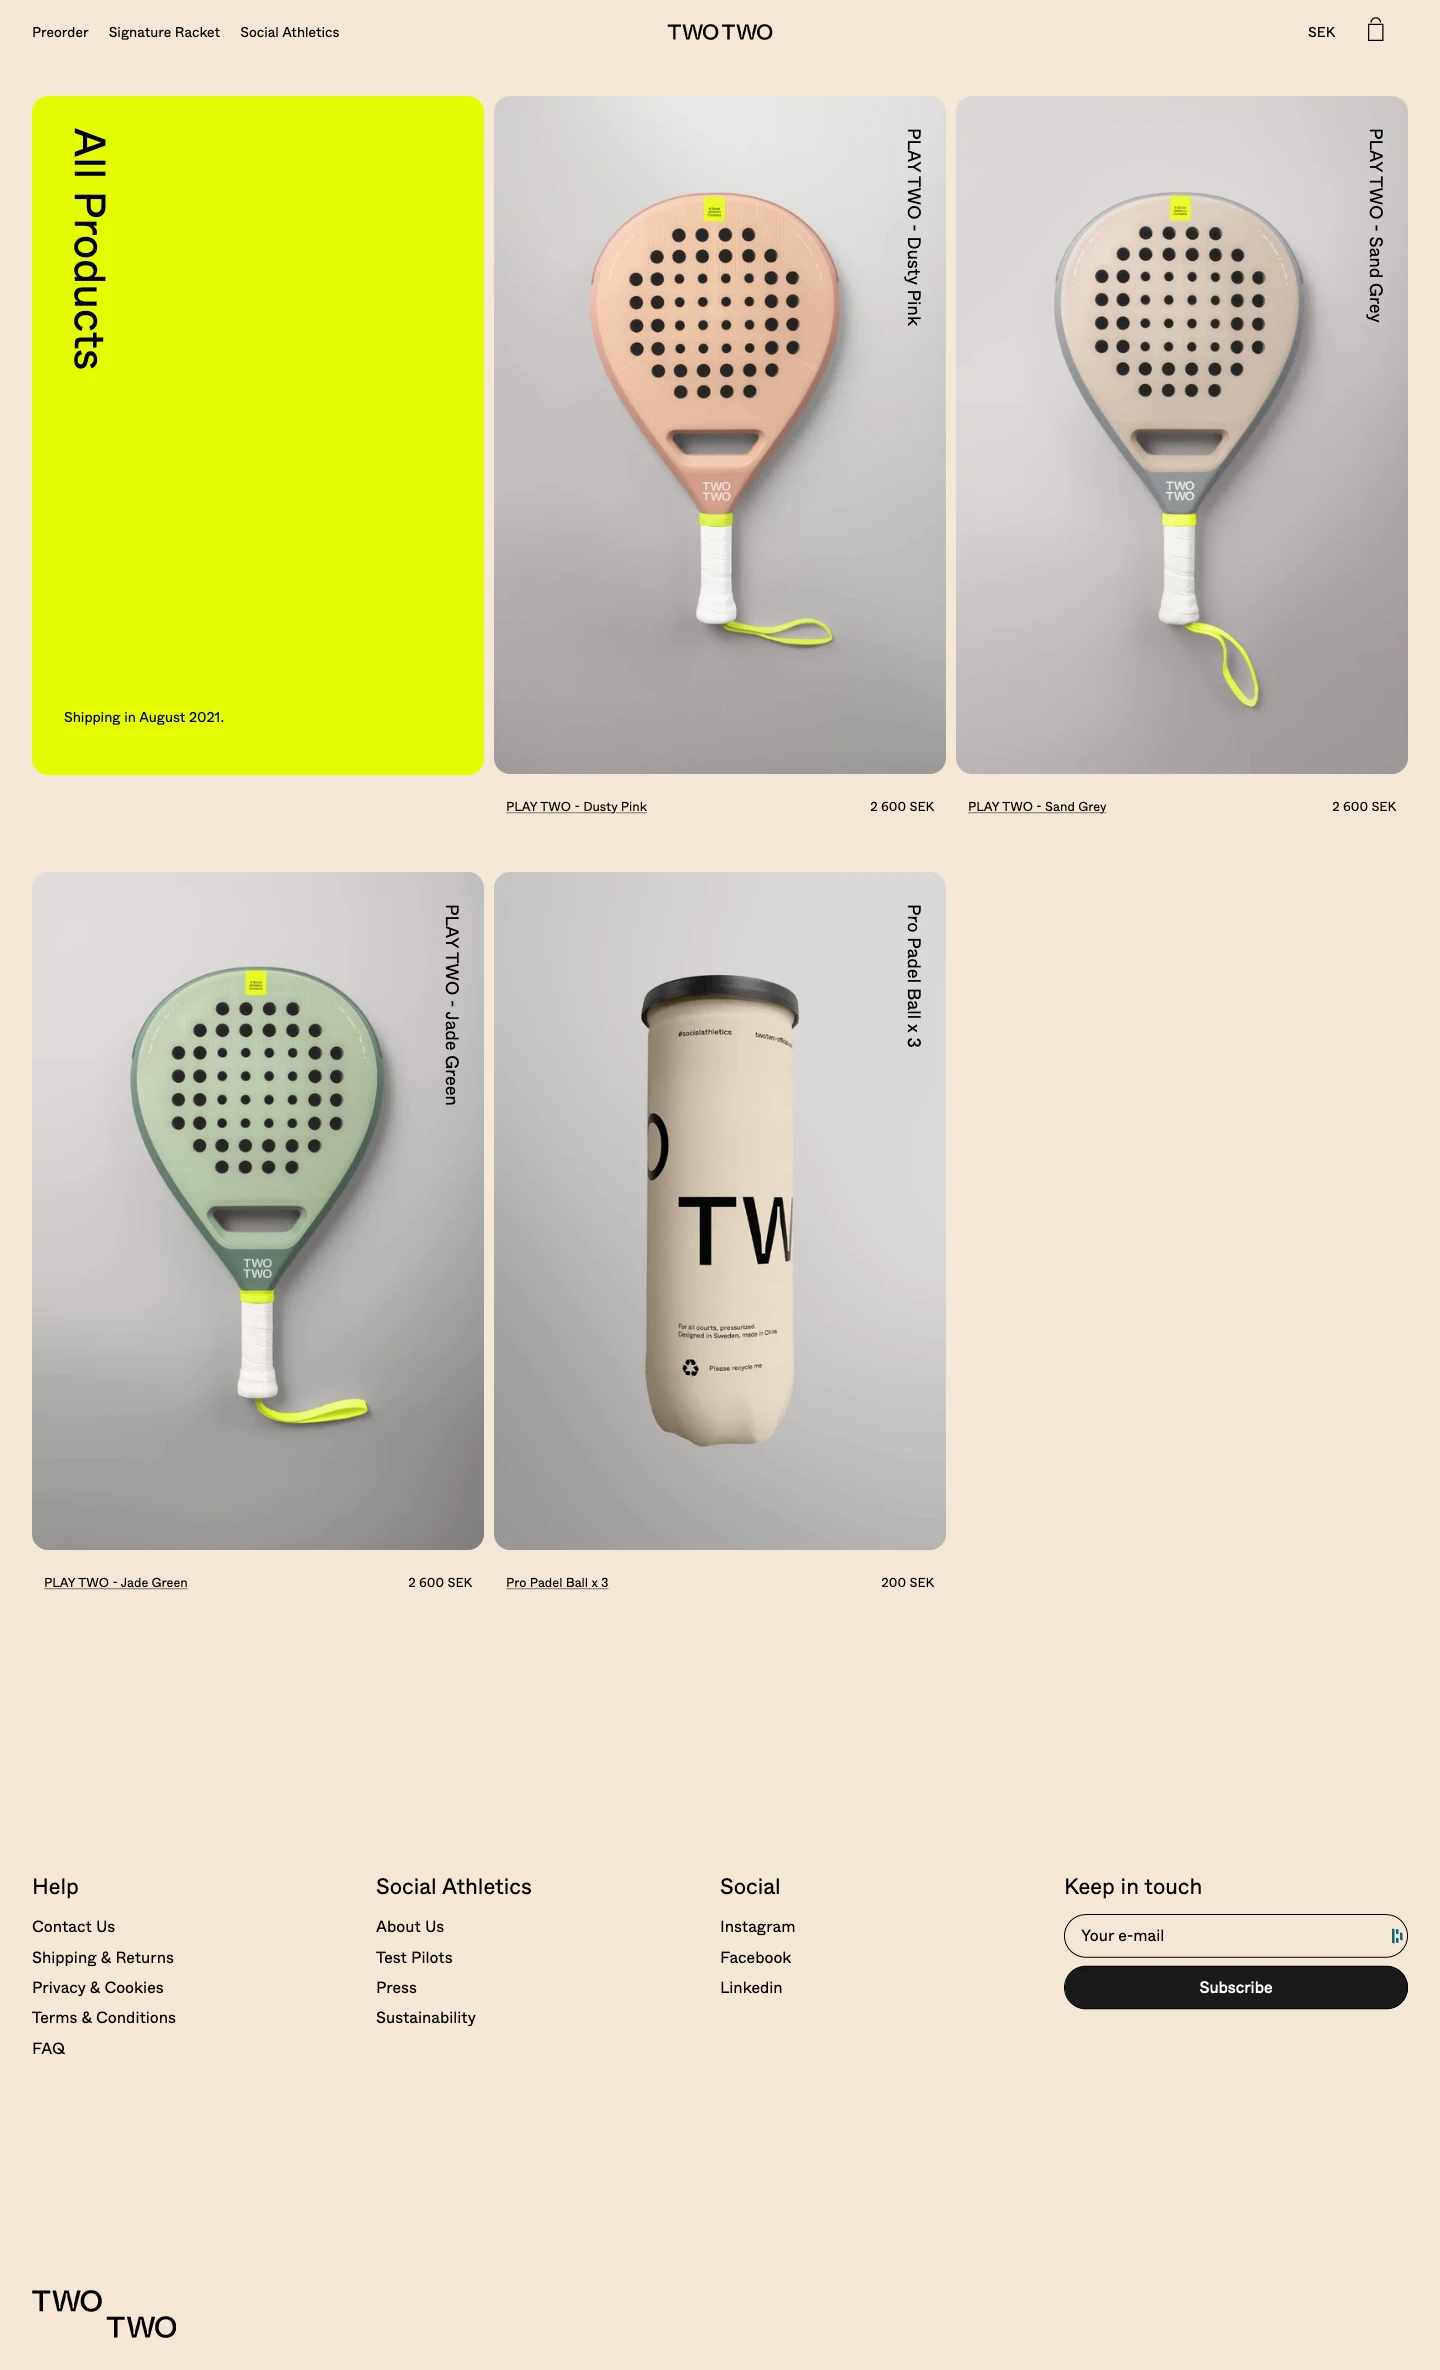 TWOTWO Landing Page Example: Padel rackets and balls, designed in Sweden using a brand new scientific approach to racket construction. Produced in one of the most prominent factories in the world. And most importantly, played anywhere and everywhere.